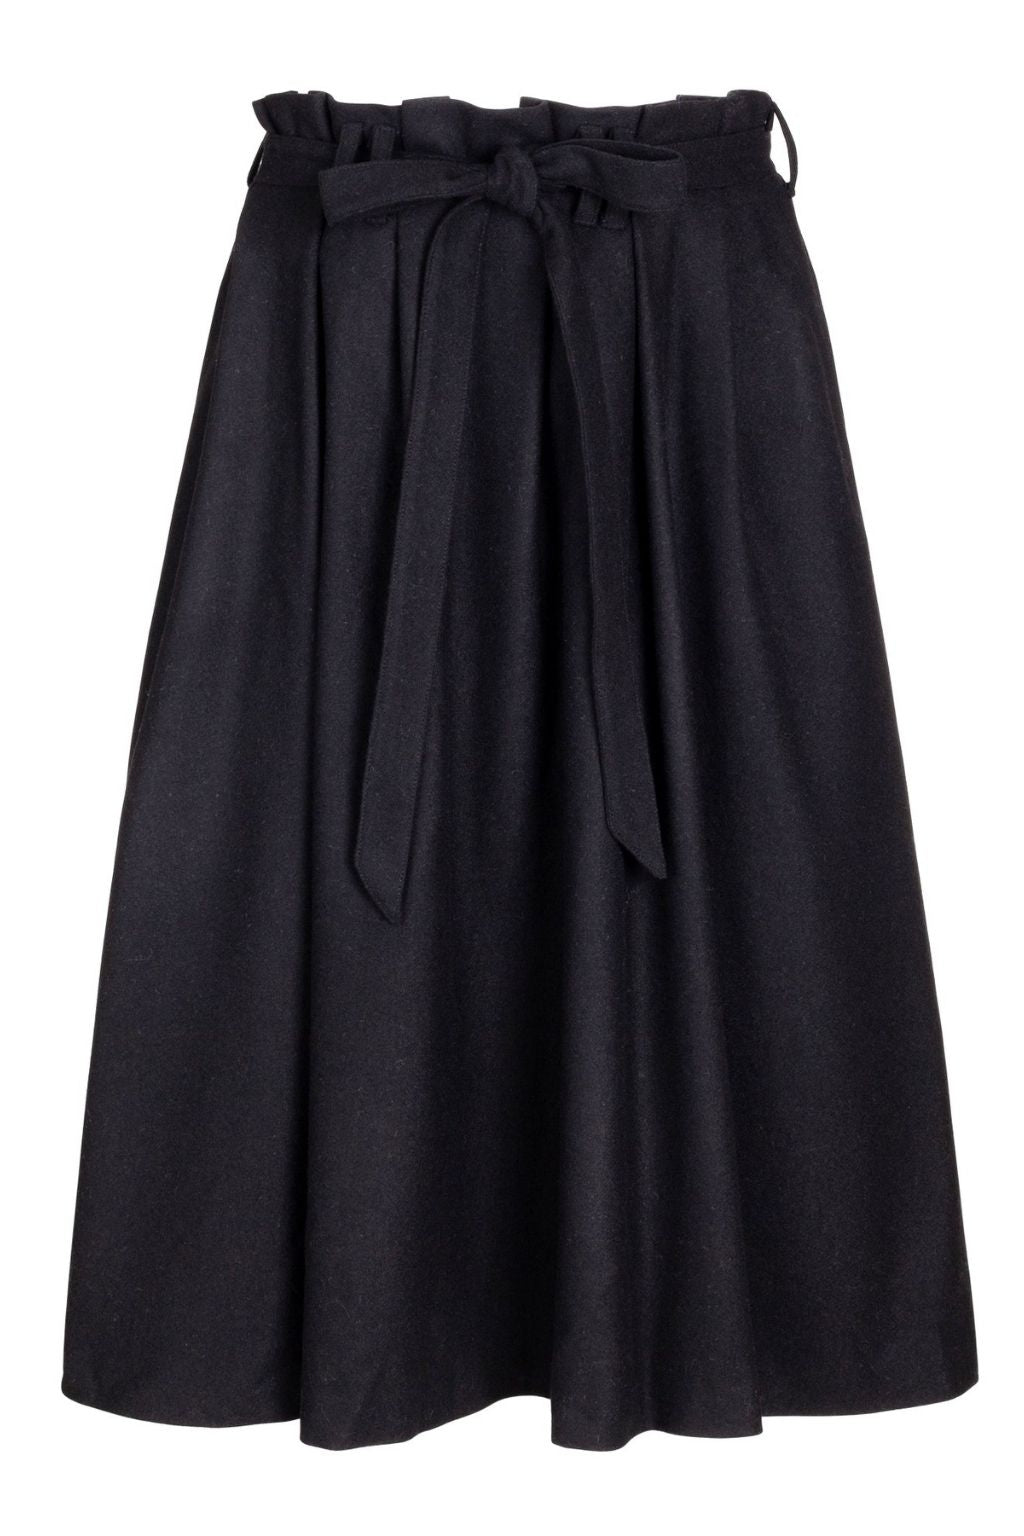 The Most Perfect Pleated Skirt (Black) – Impact Fashion